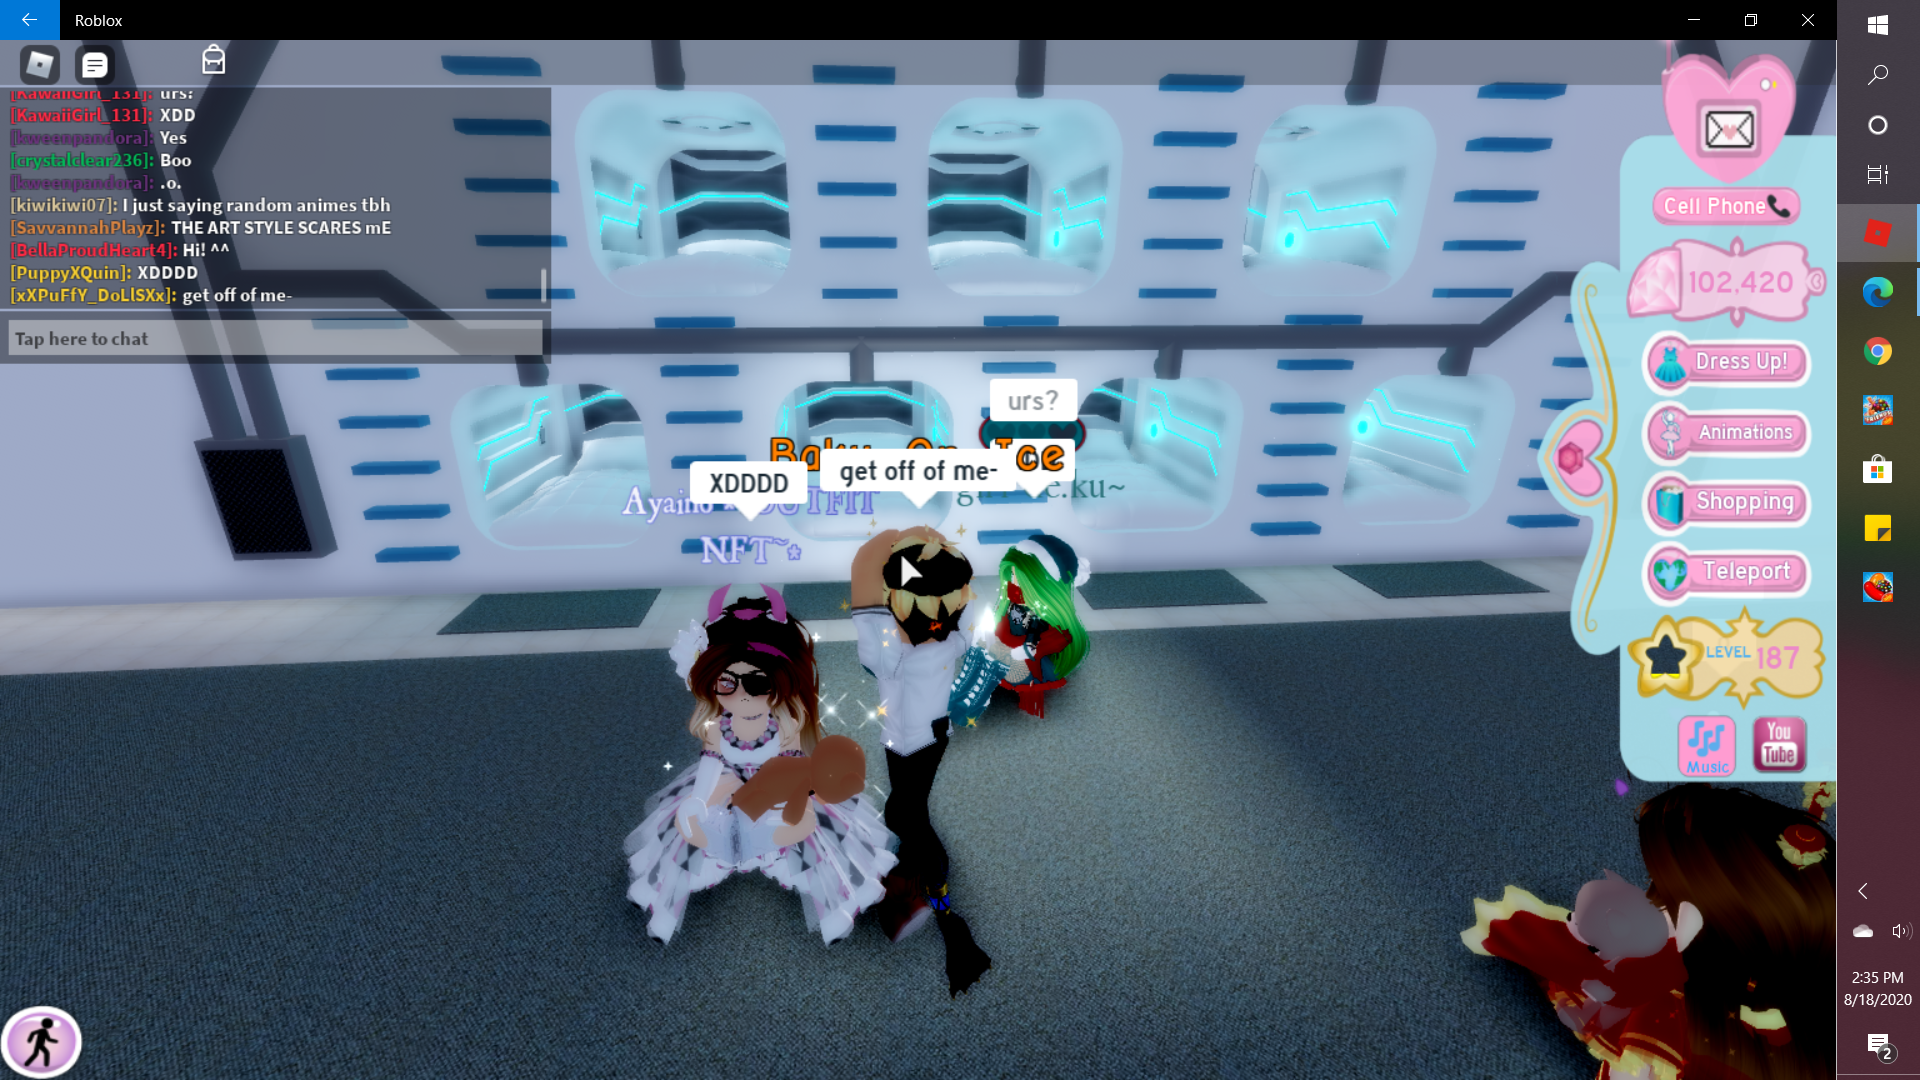 23xnhijbxpjrom - slumber party roblox royale high up all night